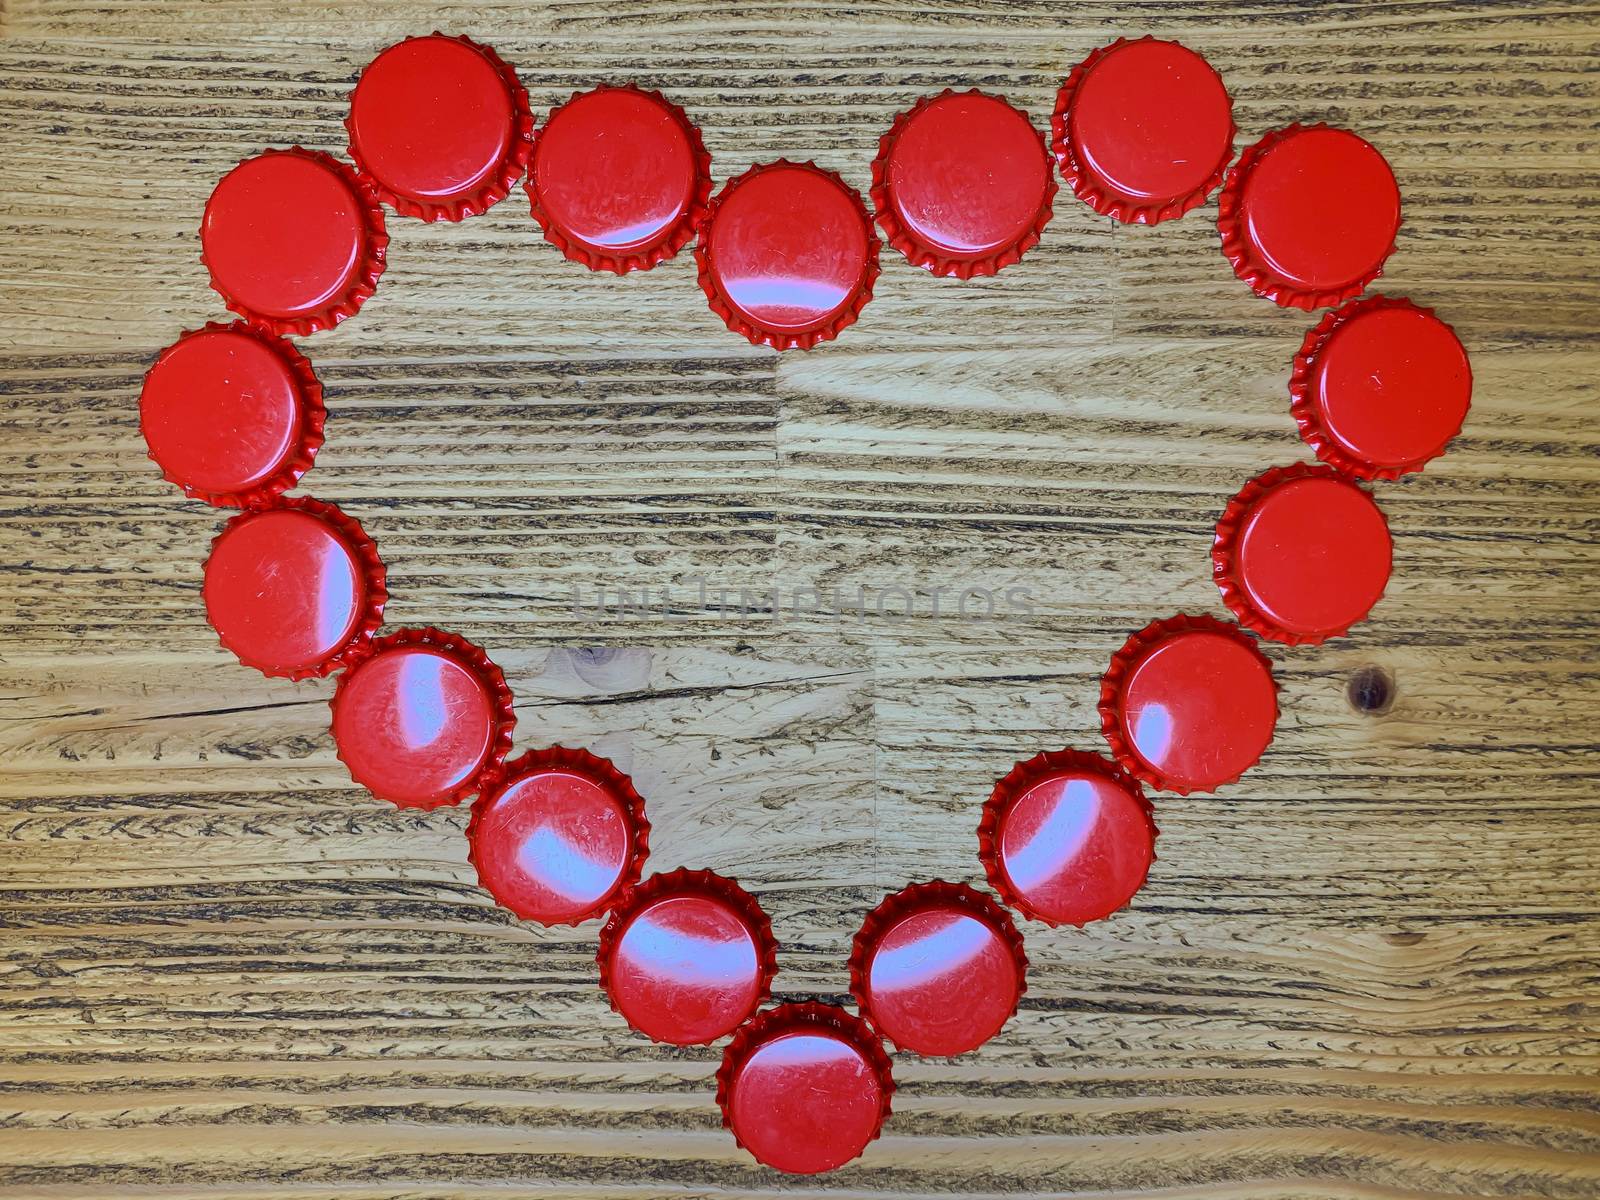 Red love heart made from beer bottle tops lids on a rustic wooden table. Beer drinkers Valentine's day concept, top view horizontal stock image.